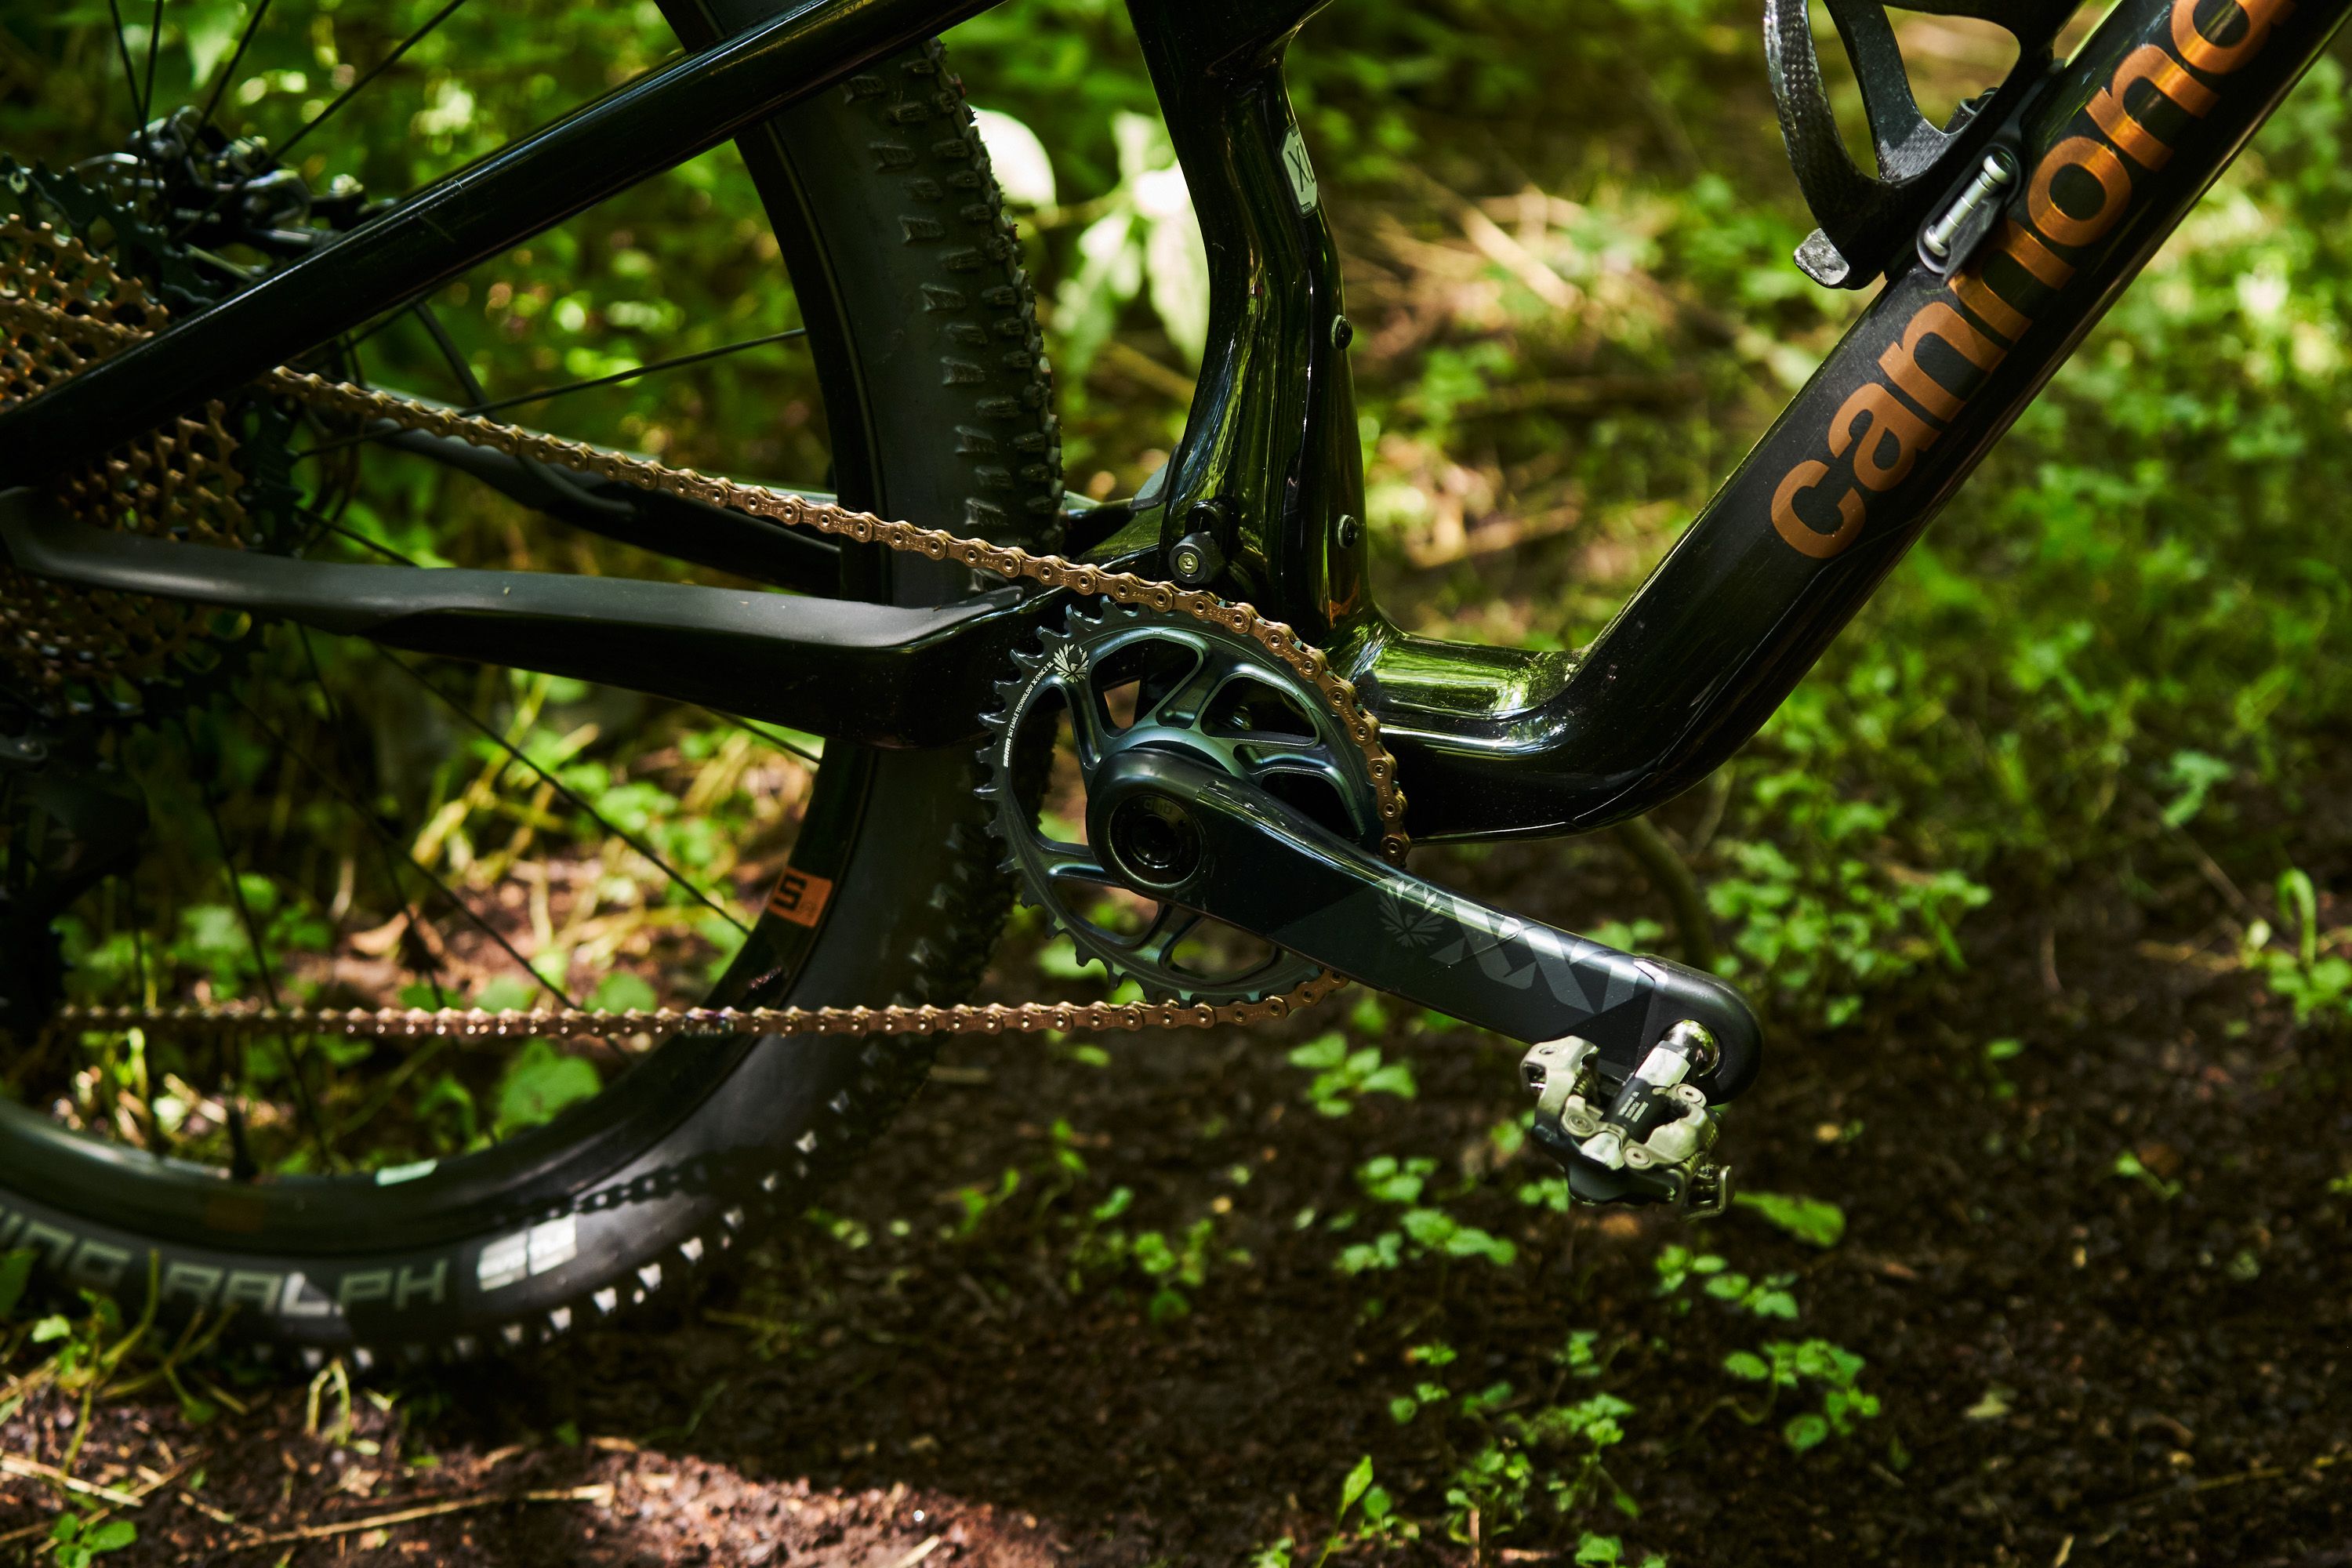 The copper chain and cassette look really sharp paired with the Cannondale logos on the frame.